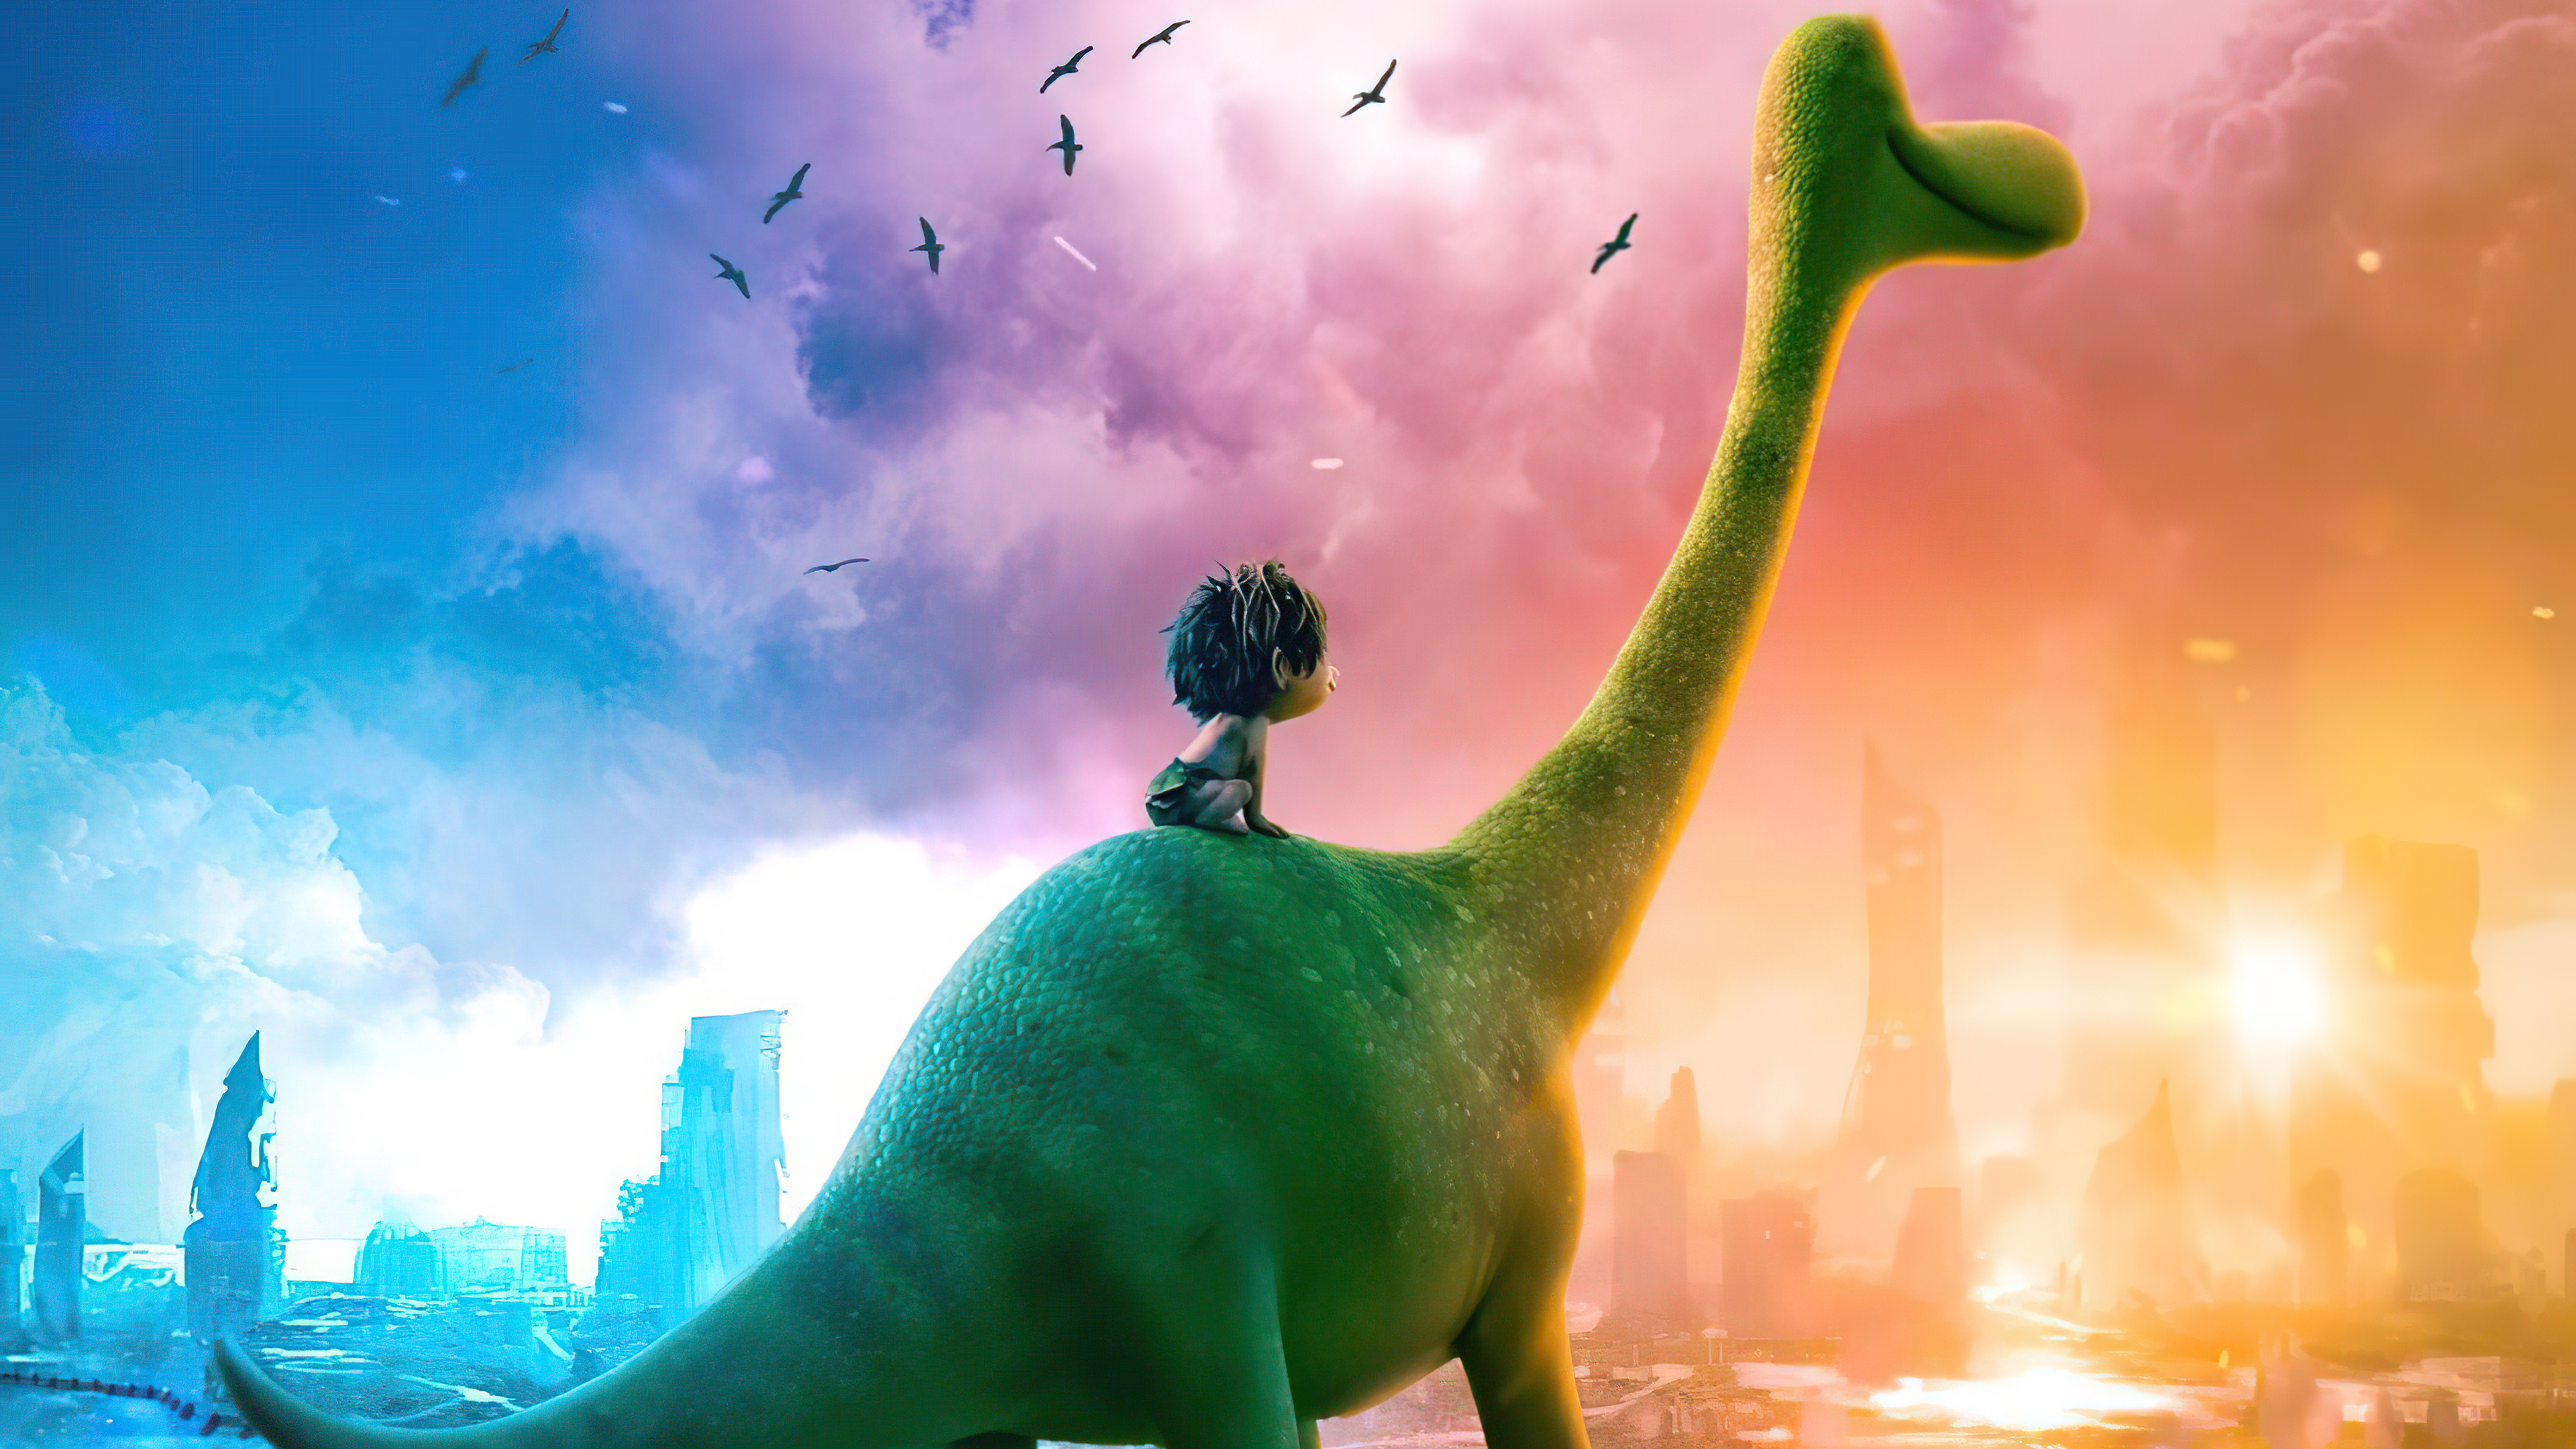 Dinosaur ipad ipad 2 ipad mini for parallax wallpapers hd desktop  backgrounds 1280x1280 images and pictures